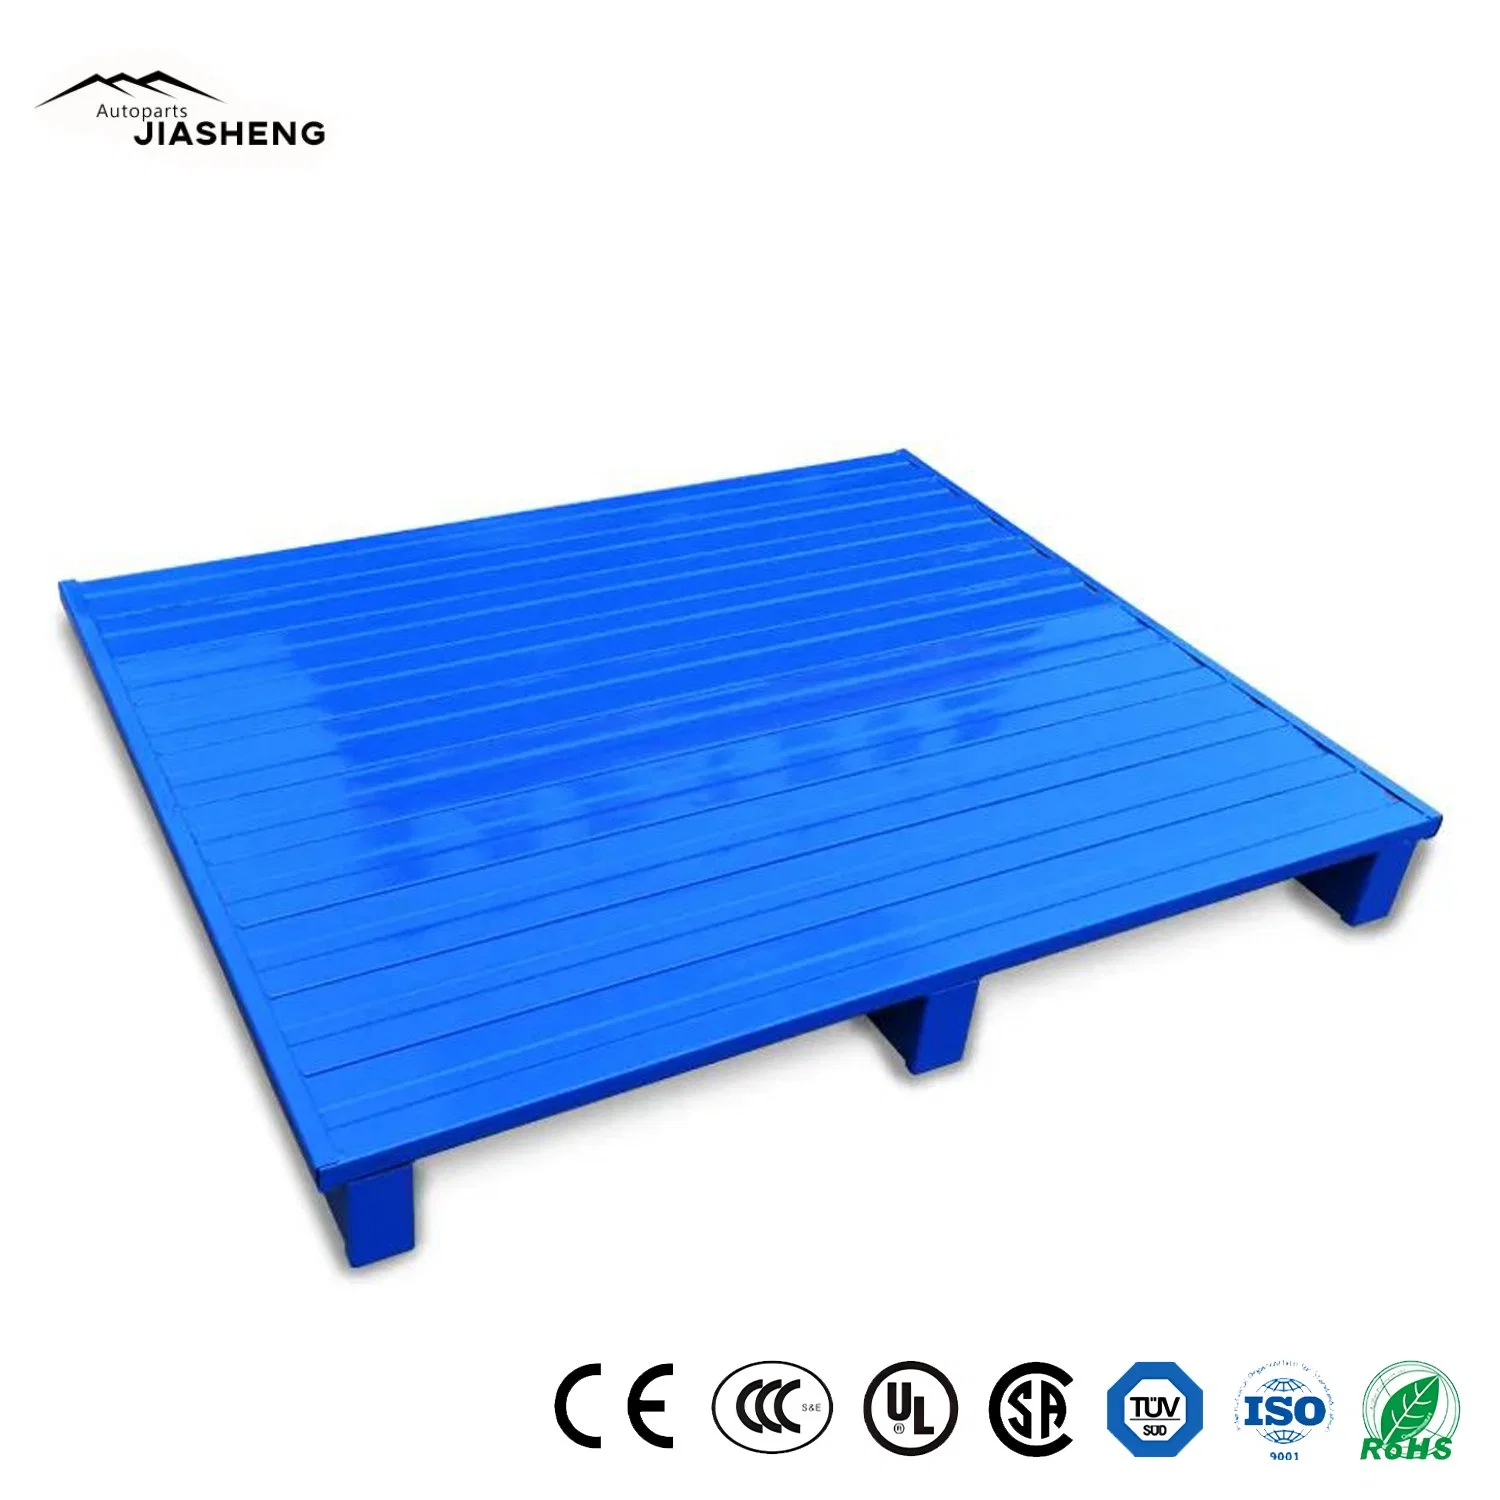 Customized Anti-Slip Al Pallets for All Industry for Food for Anti-Rust Support OEM Pallet Cage Storage Solution for Lift Metal Tray Hot Sale